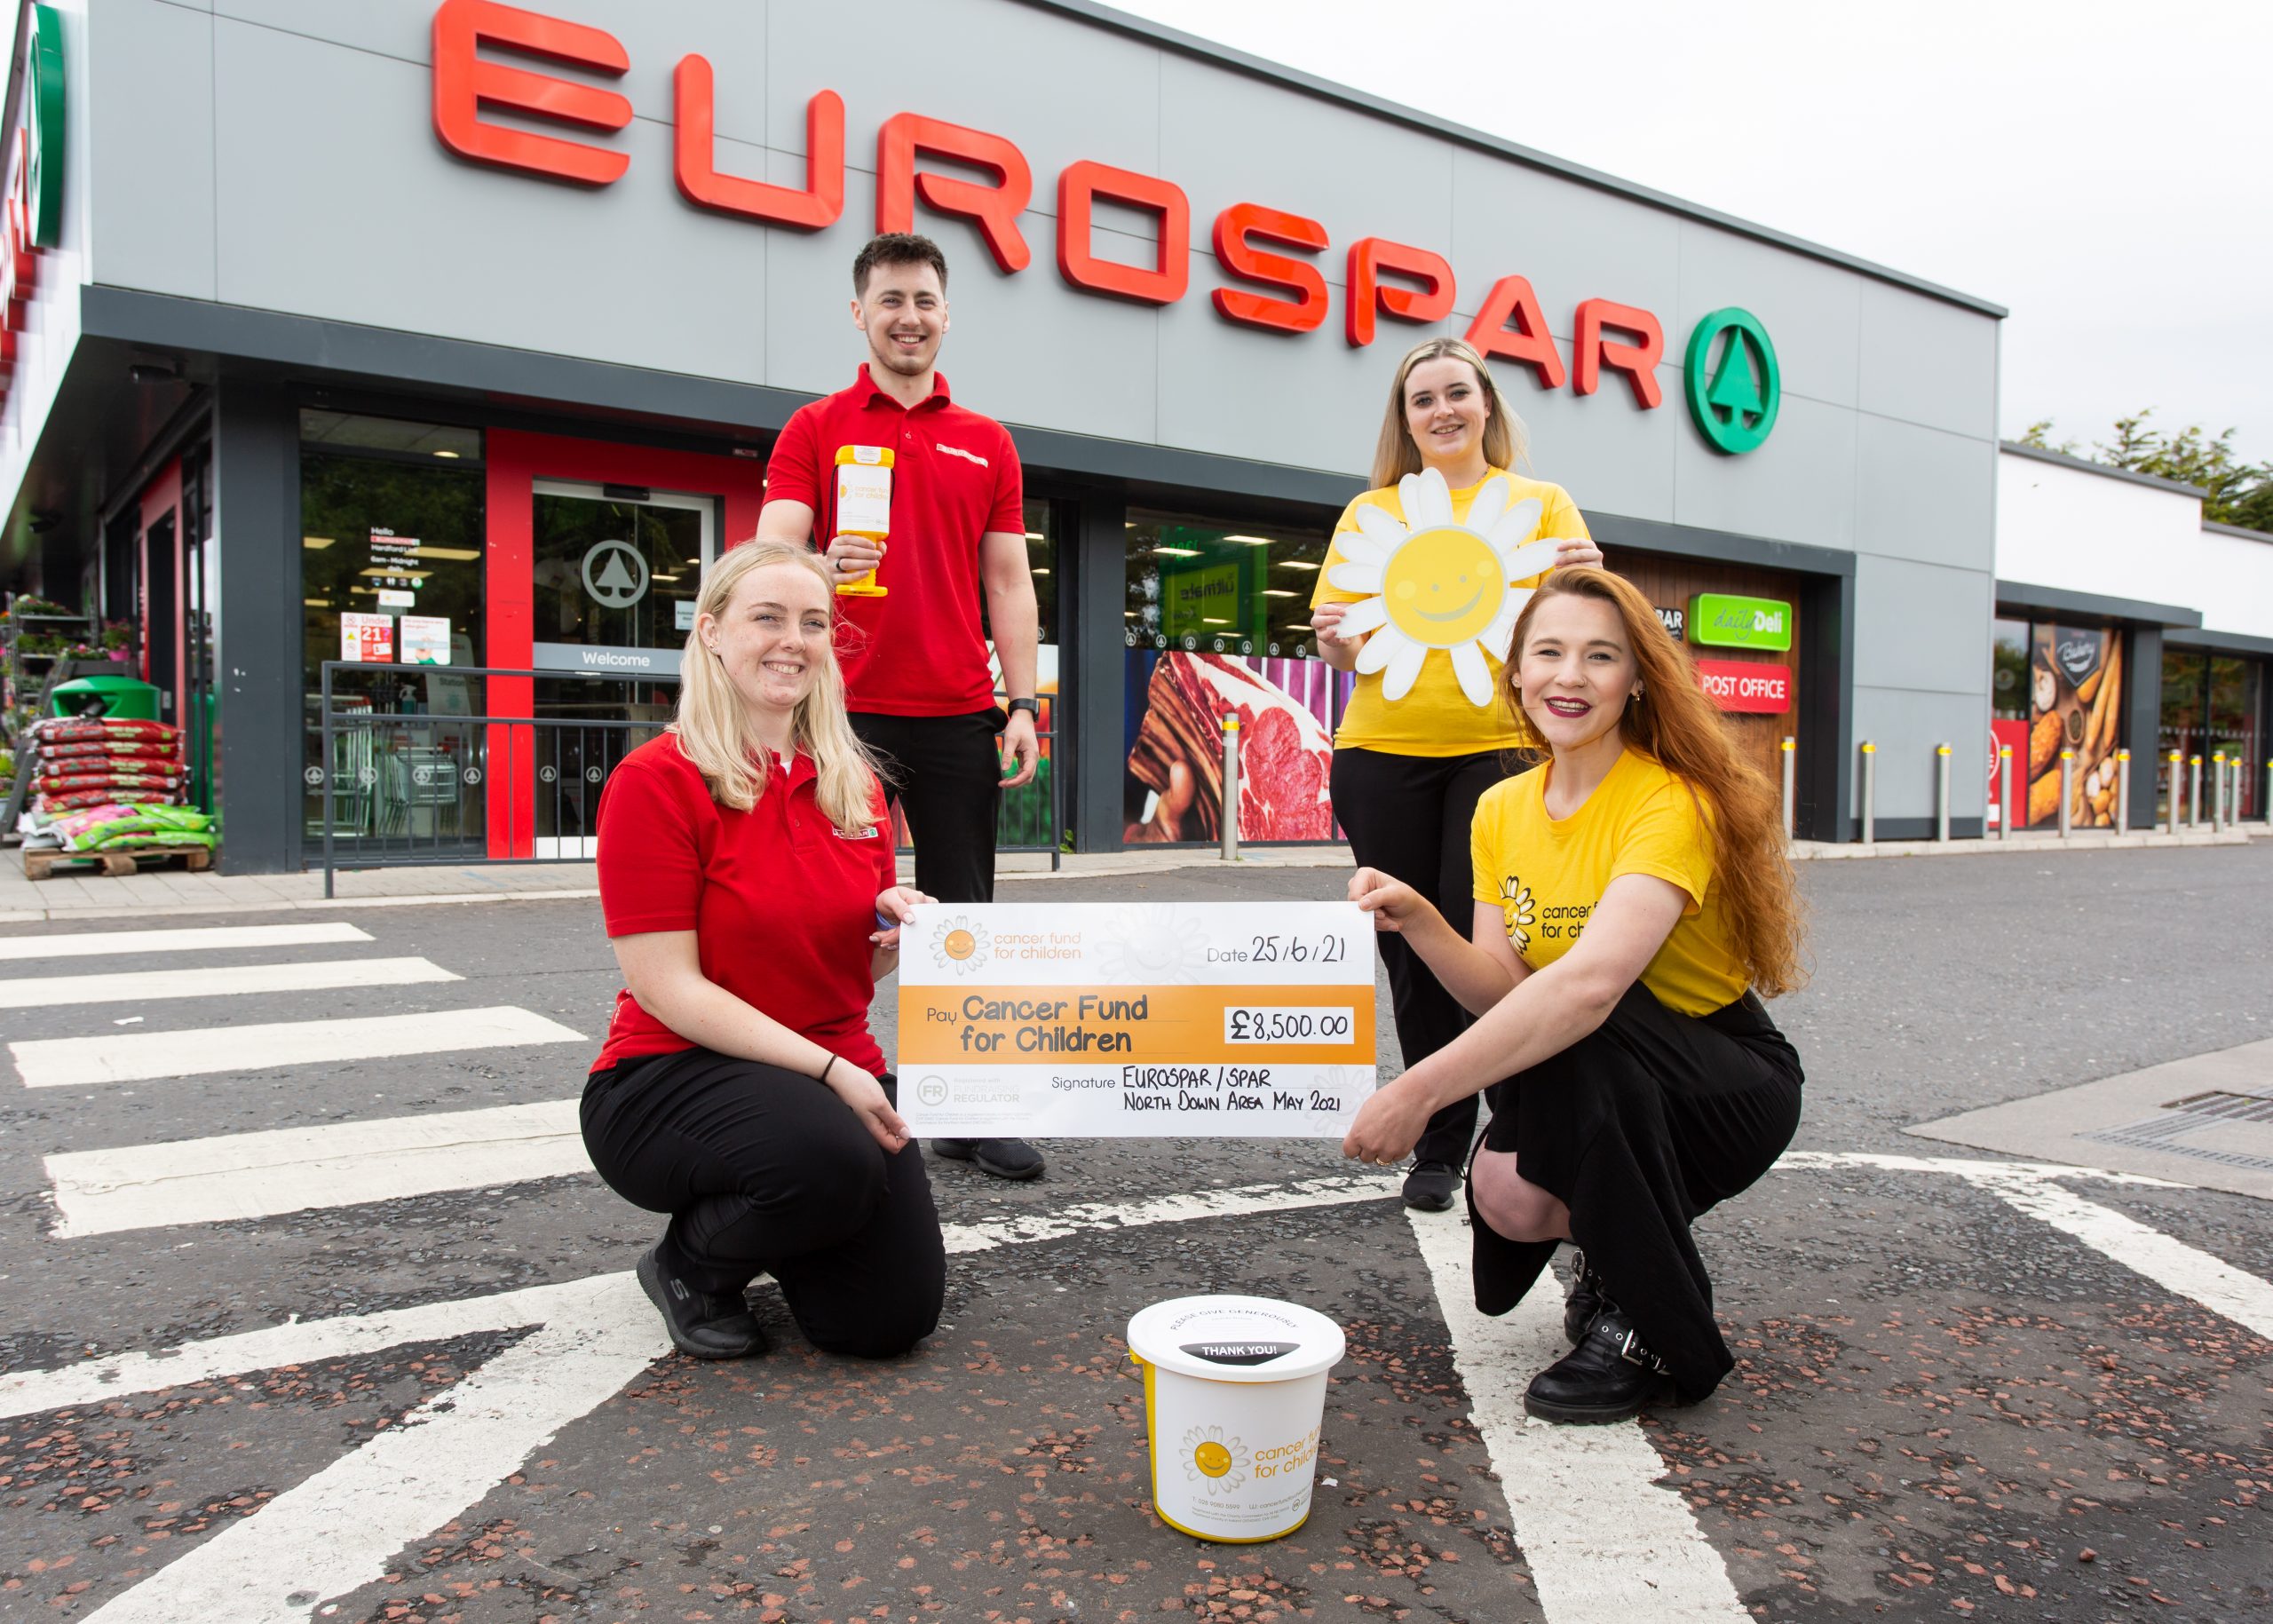 EUROSPAR North Down and East Belfast raise £8,500 for children’s charity